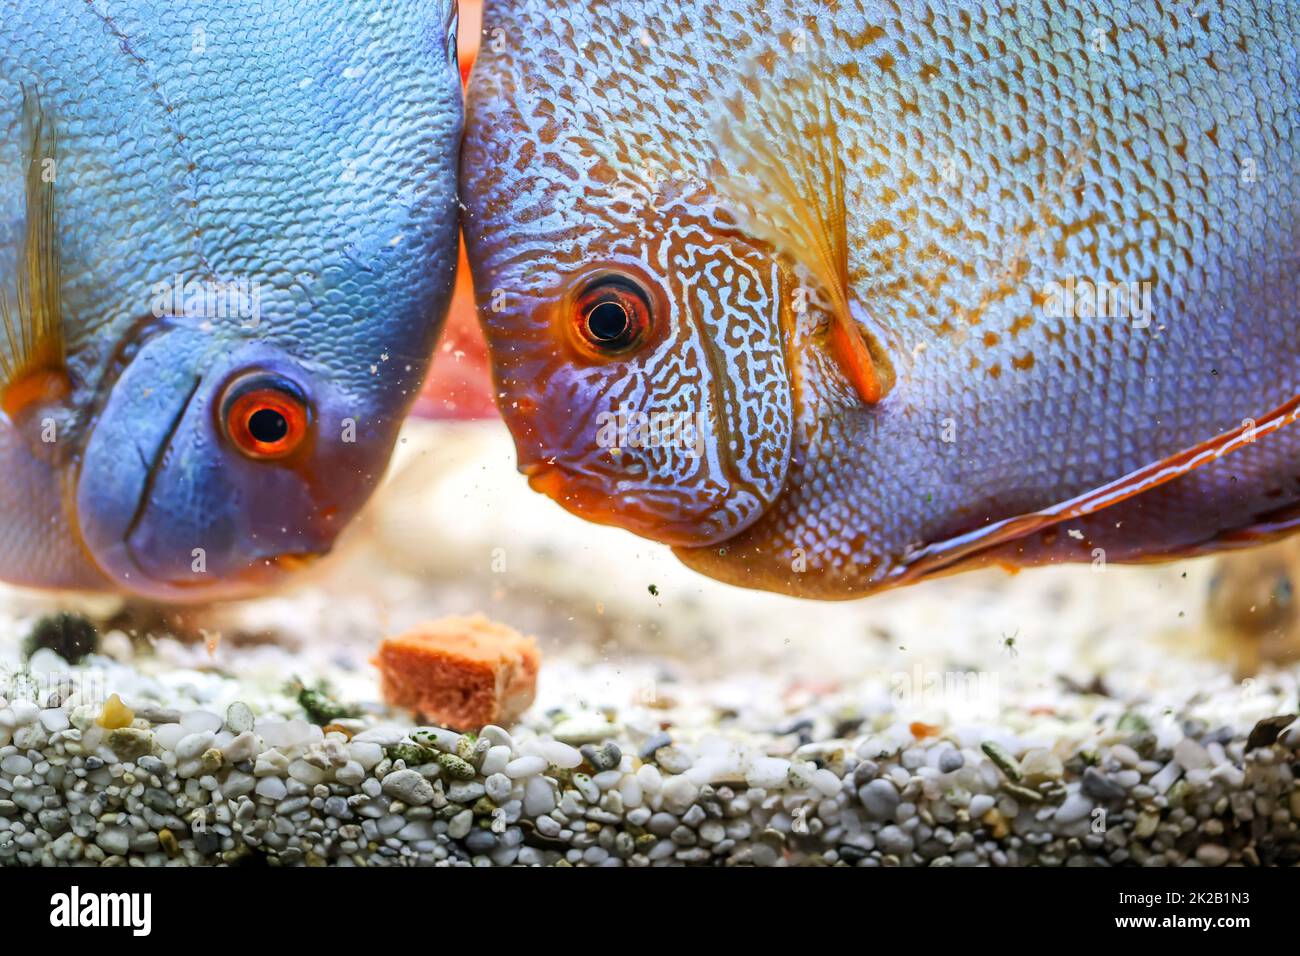 Discus fish, discus cichlids at feeding time. They bite off the food and partially blow it back into the water. Stock Photo